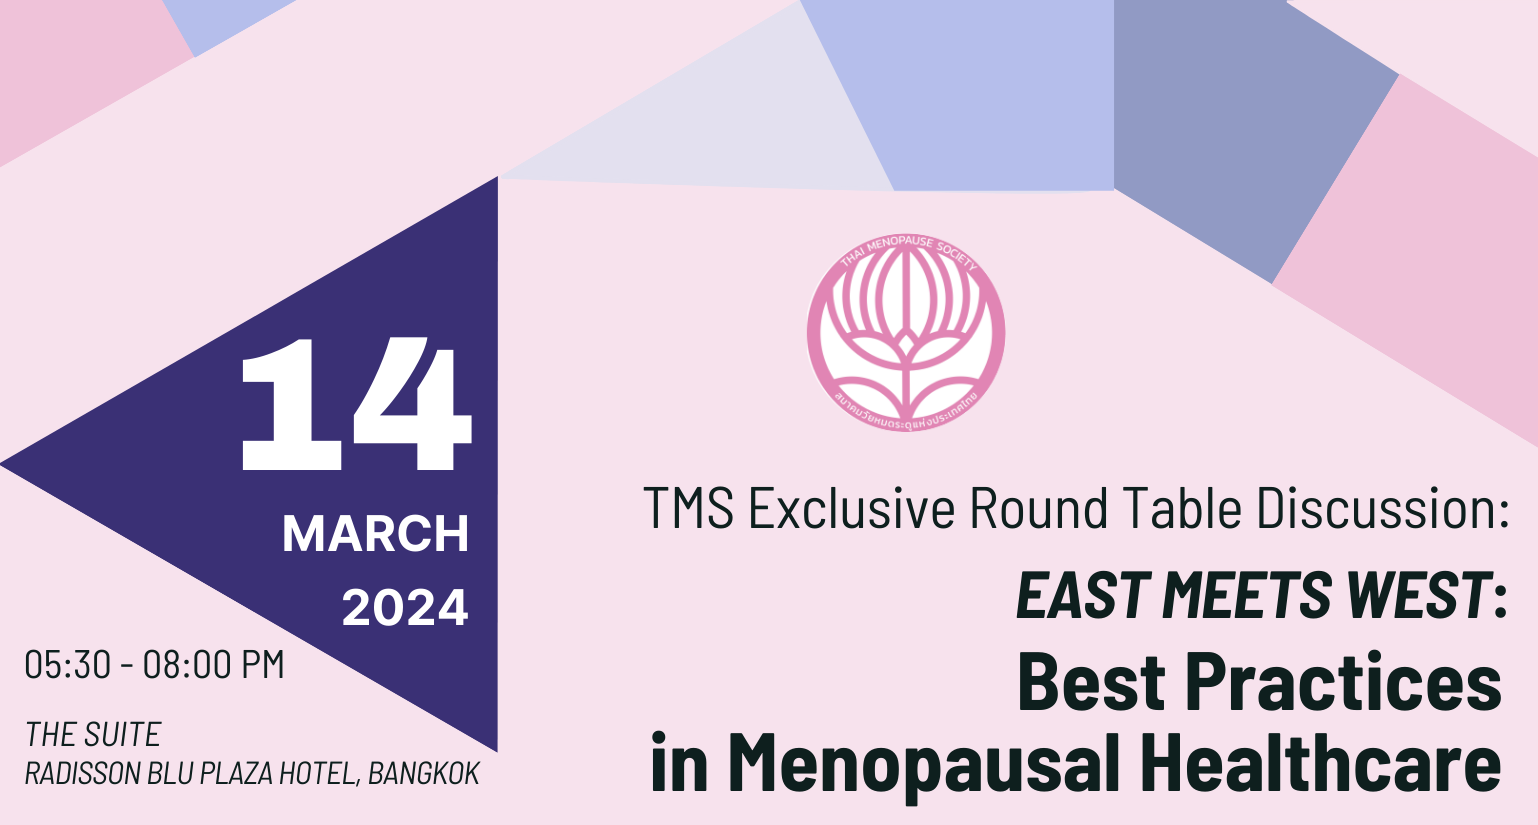 tms-exclusive-round-table-discussion-east-meets-west-best-practices-in-menopausal-healthcare